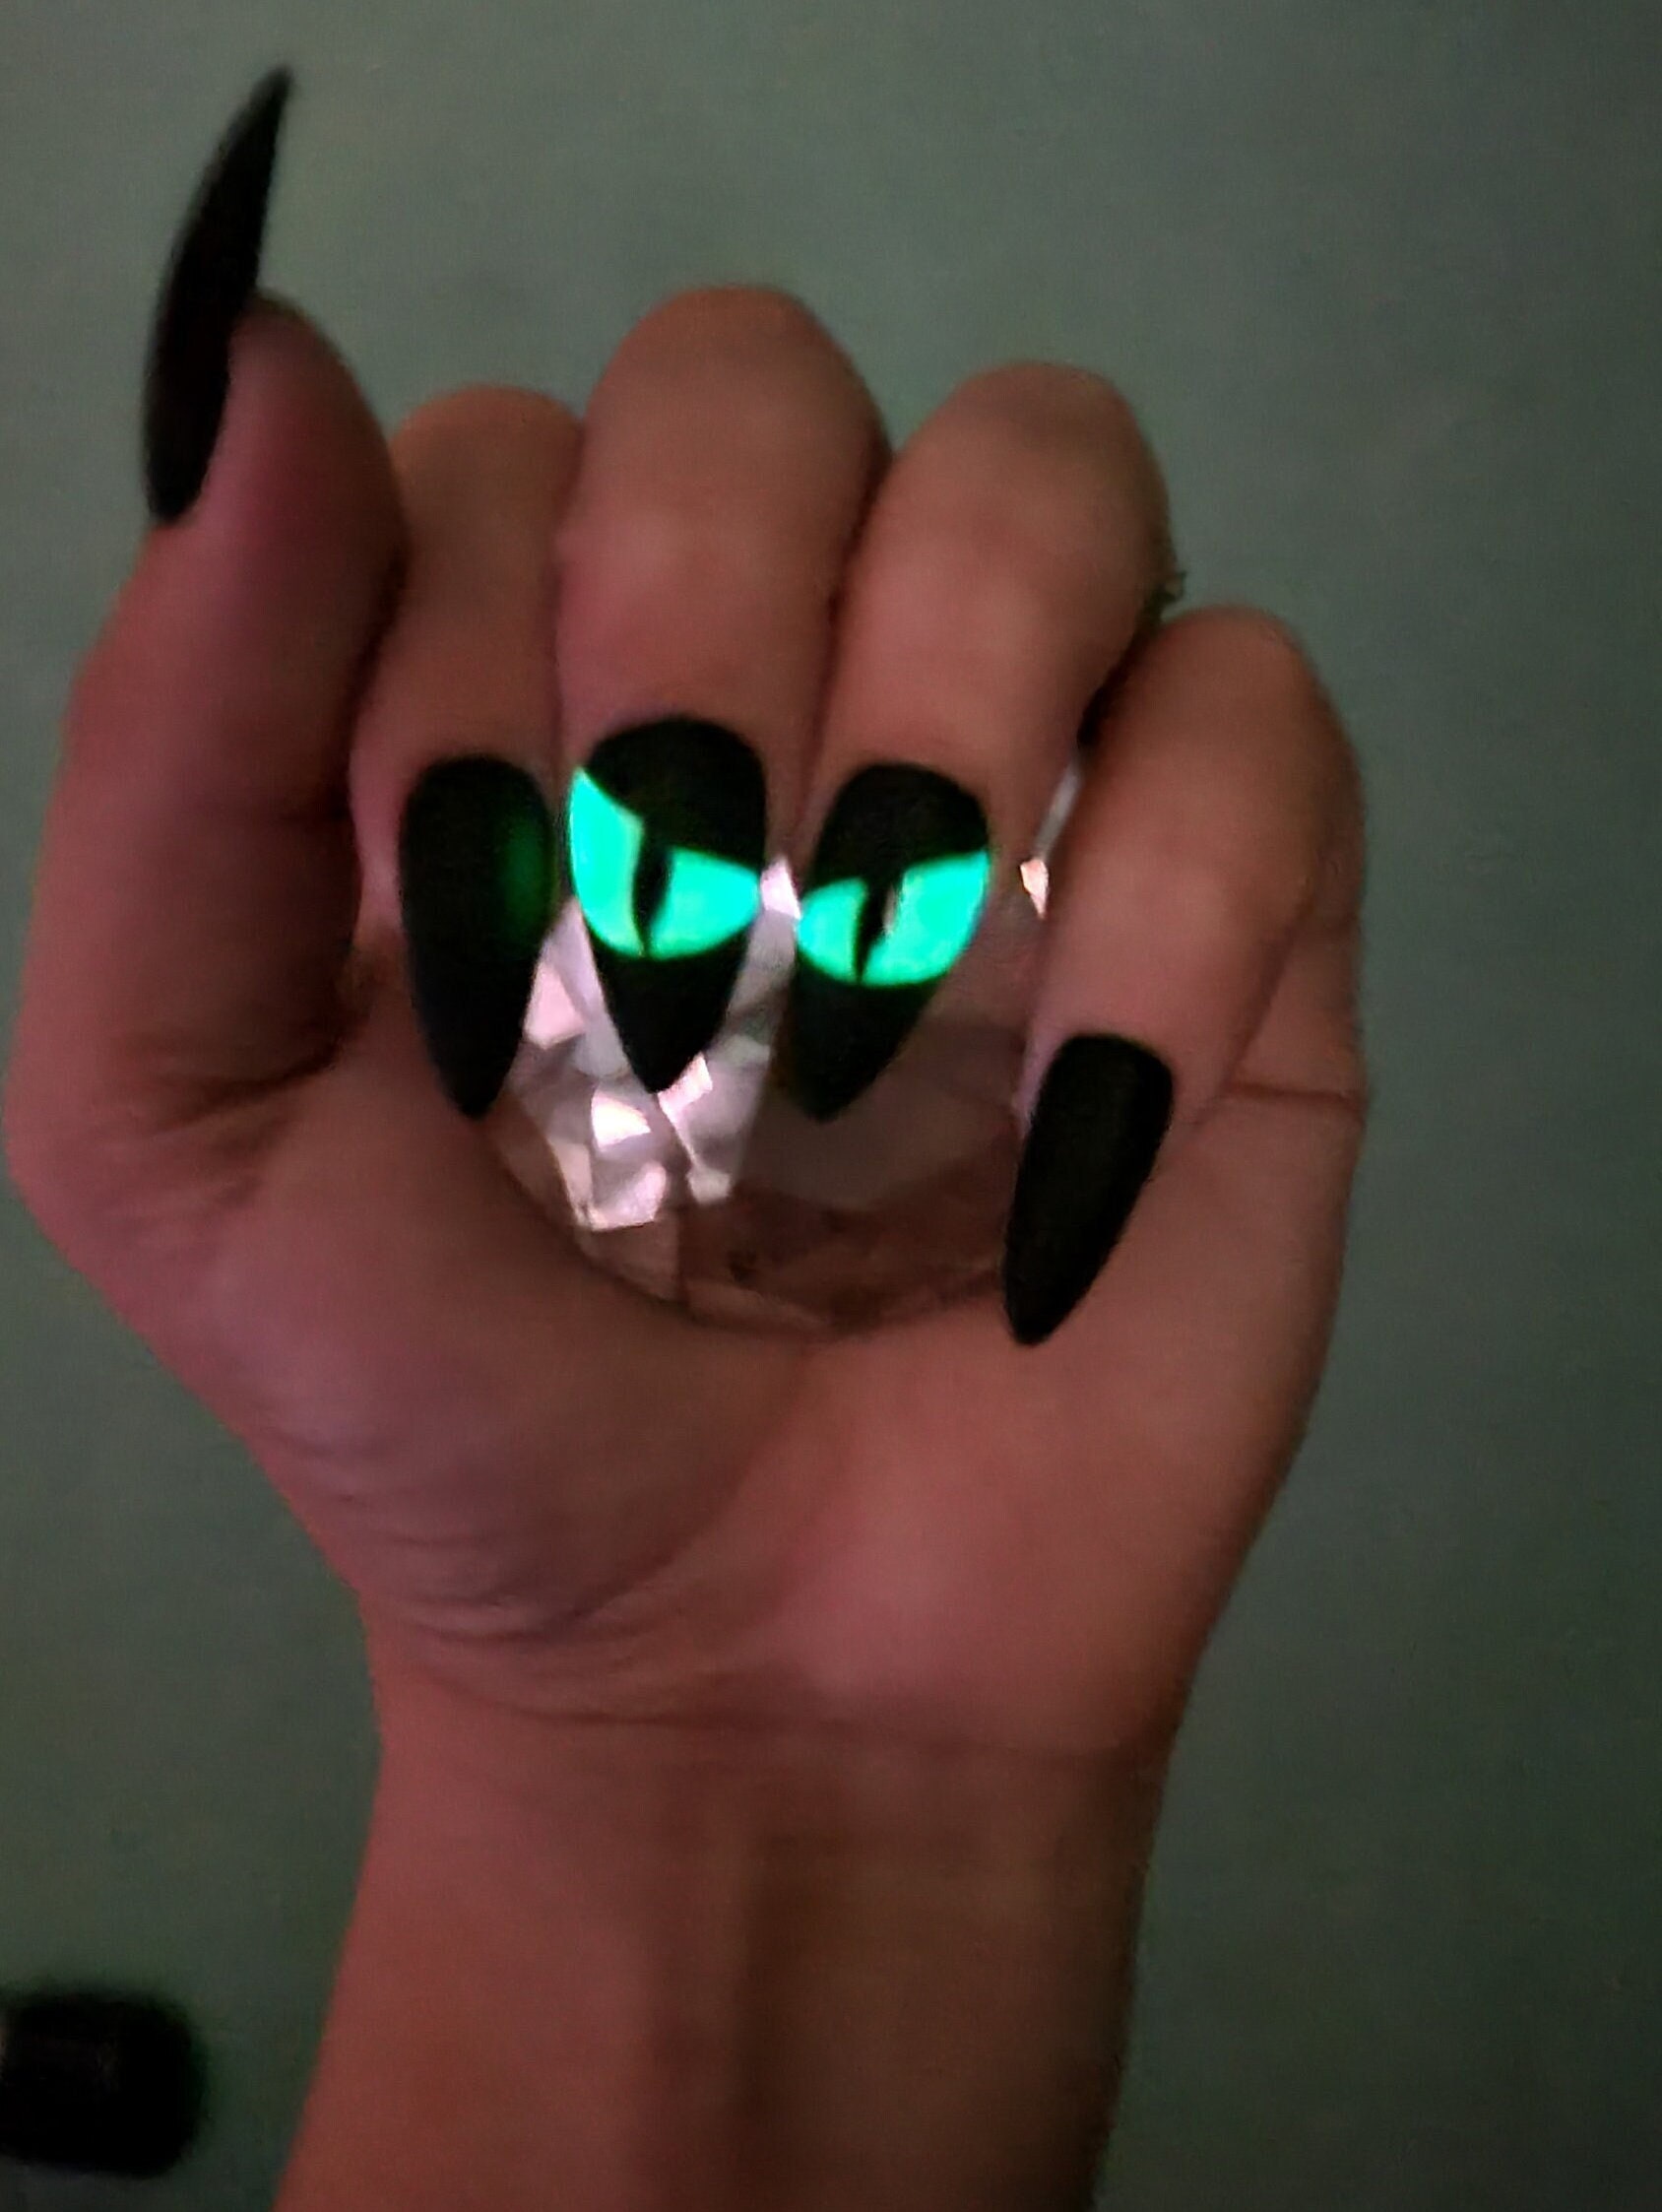 LETS GET LIT Glow In The Dark Nail Topper- 10 Toxin Free Nail Polish- Vegan  Friendly, Cruelty Free